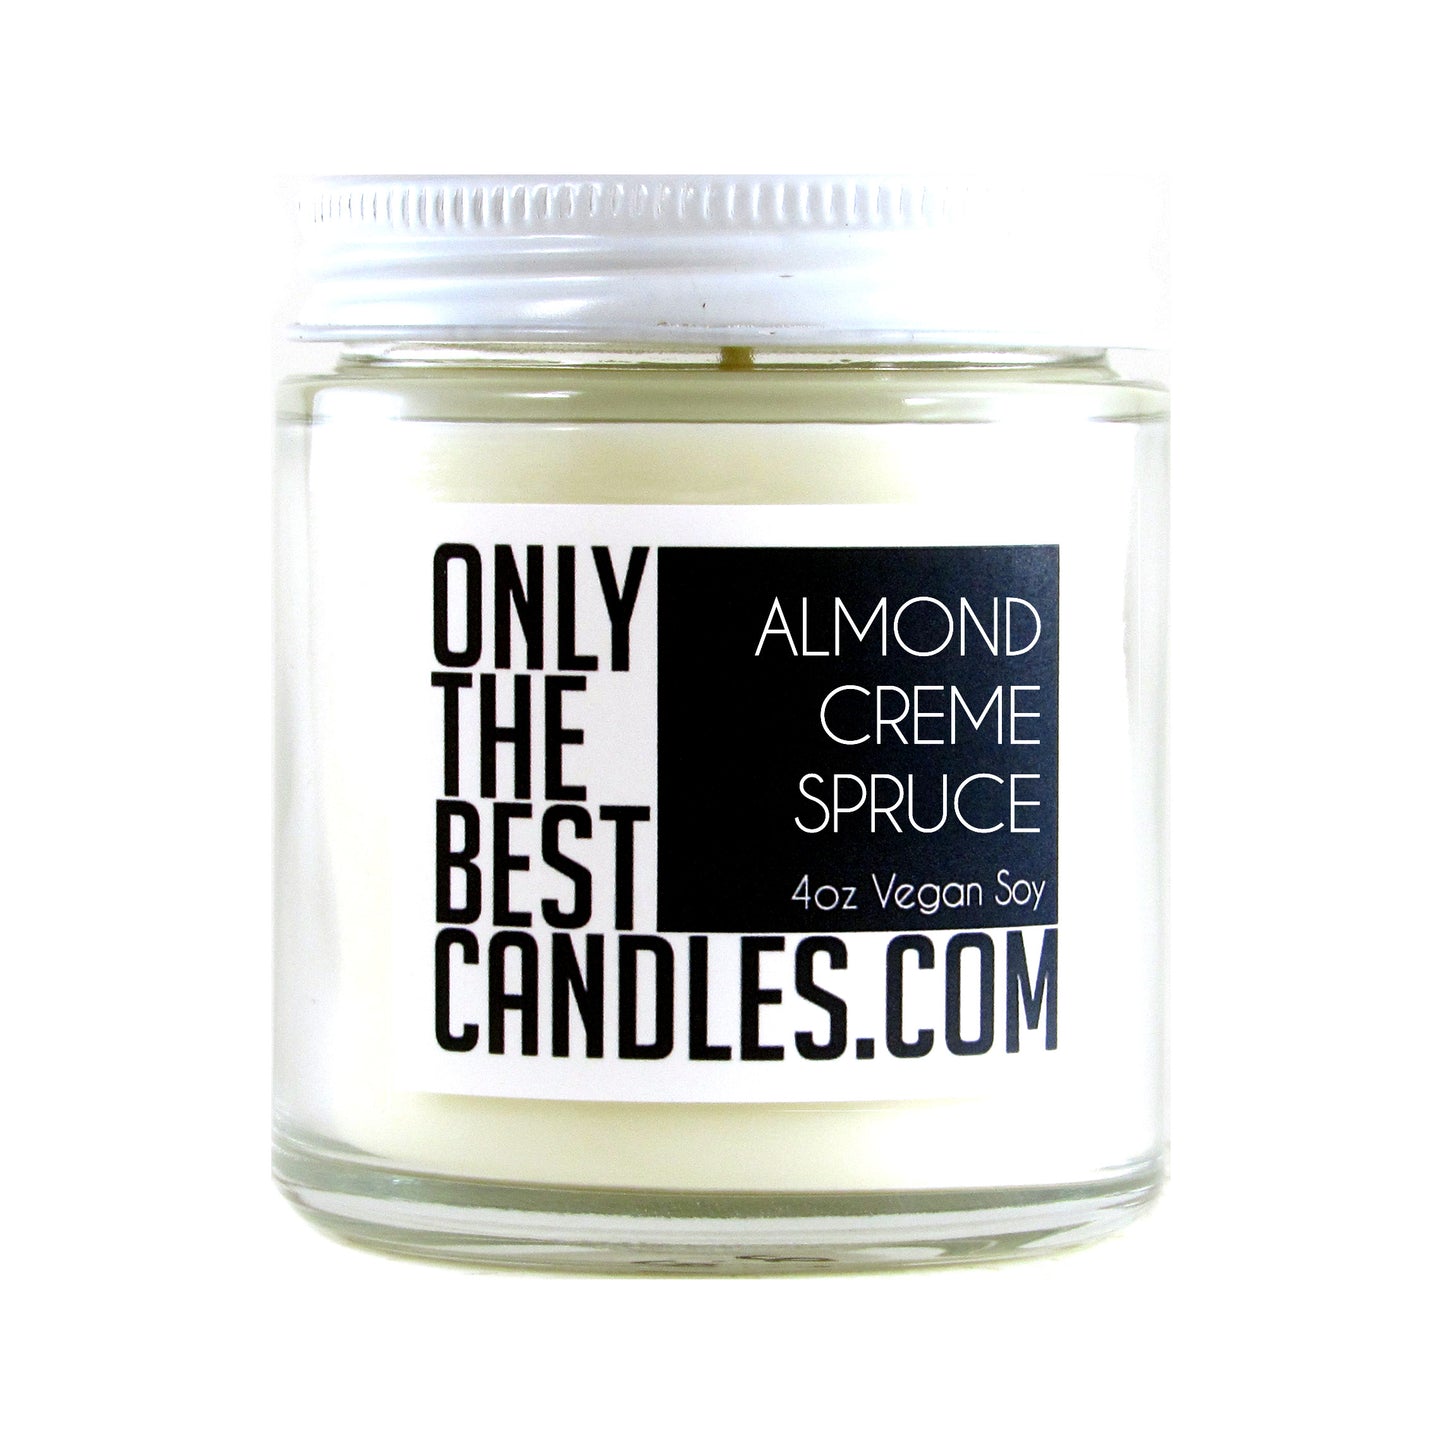 Almond Creme Spruce 4oz Soy Candle